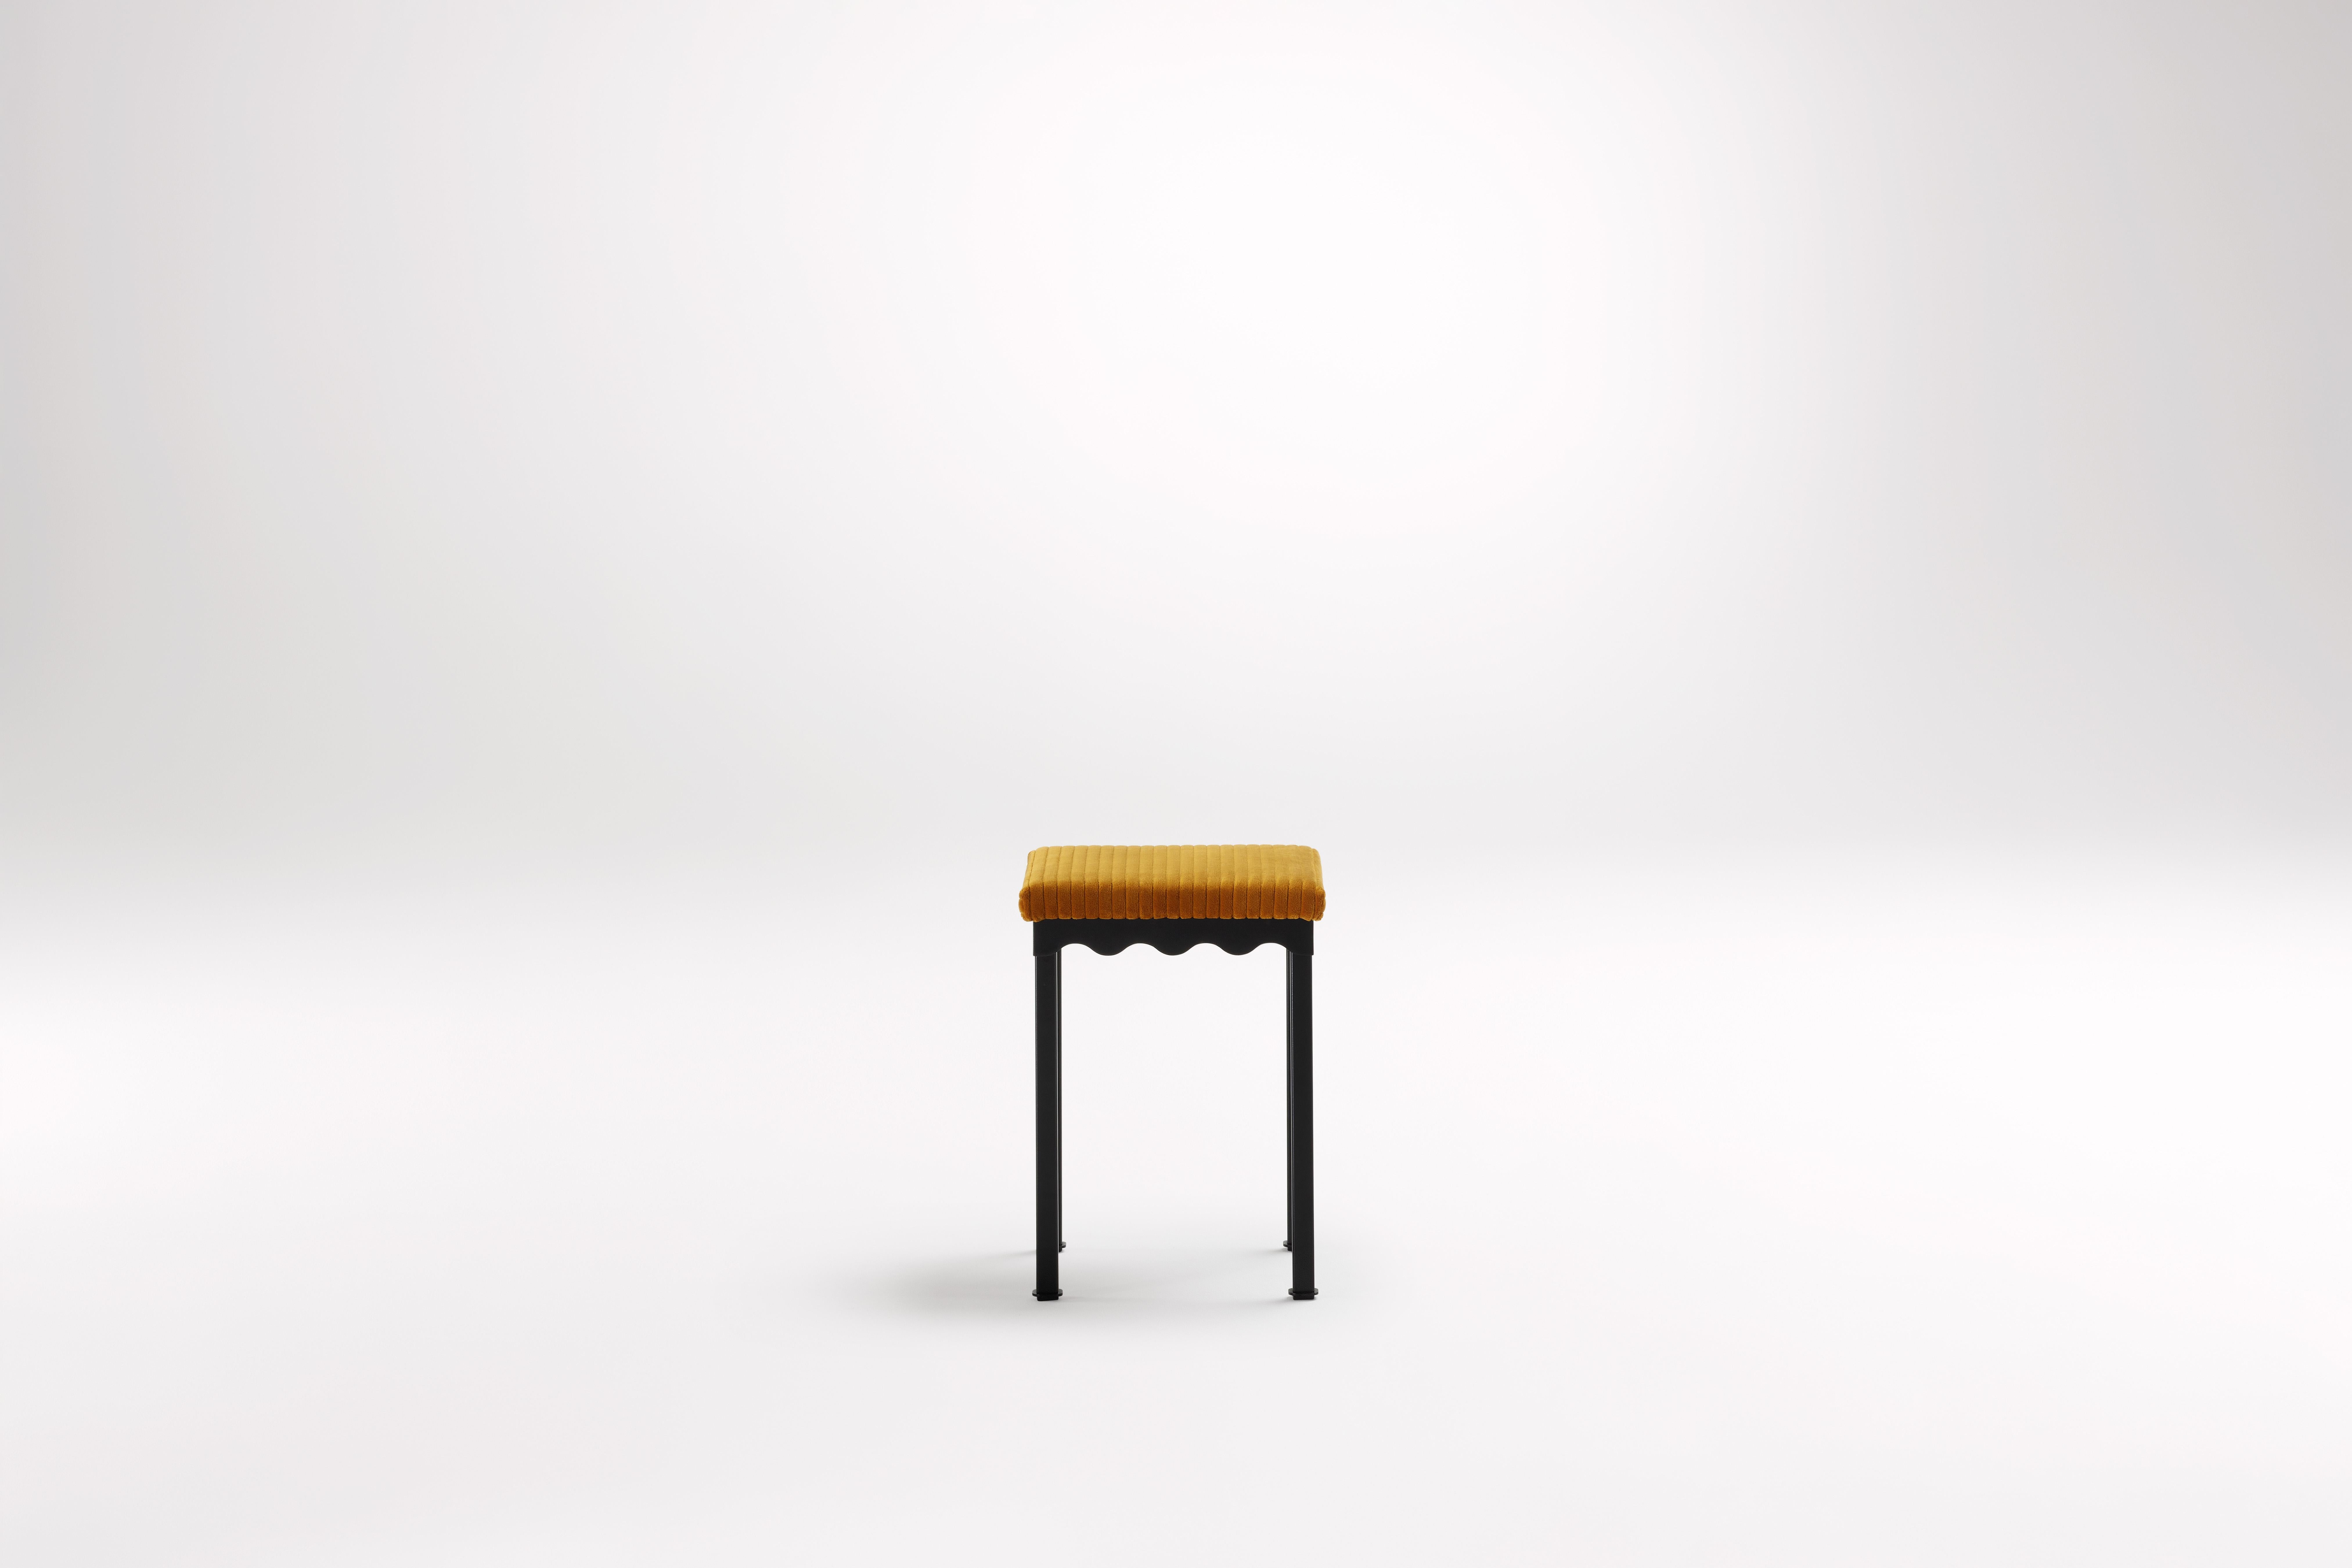 Mikado Bellini Low Stool by Coco Flip
Dimensions: D 34 x W 34 x H 45 cm
Materials: Timber / Stone tops, Powder-coated steel frame. 
Weight: 5 kg
Frame Finishes: Textura Black.

Coco Flip is a Melbourne based furniture and lighting design studio, run